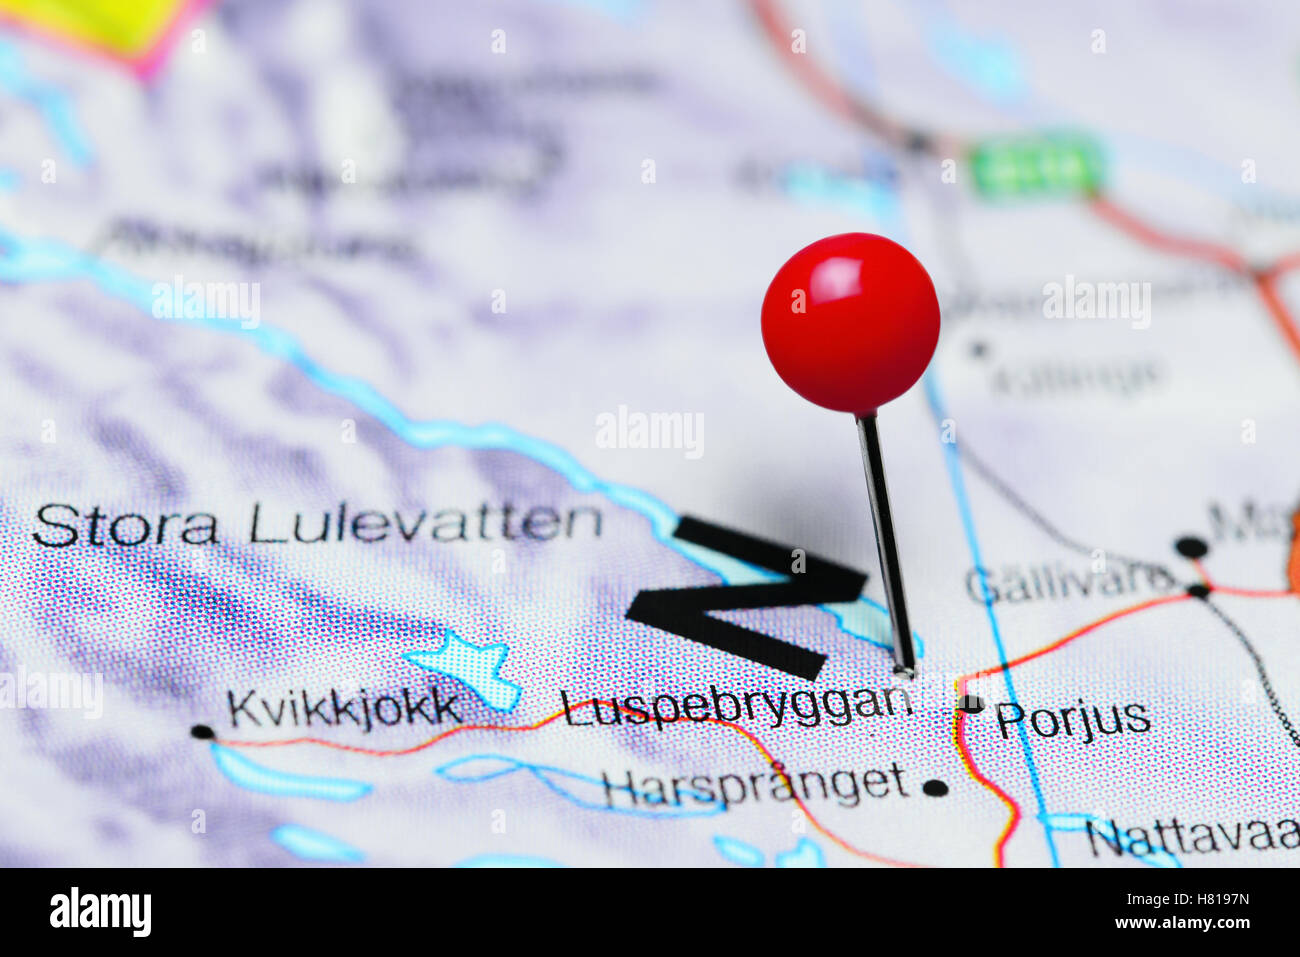 Luspebryggan pinned on a map of Sweden Stock Photo